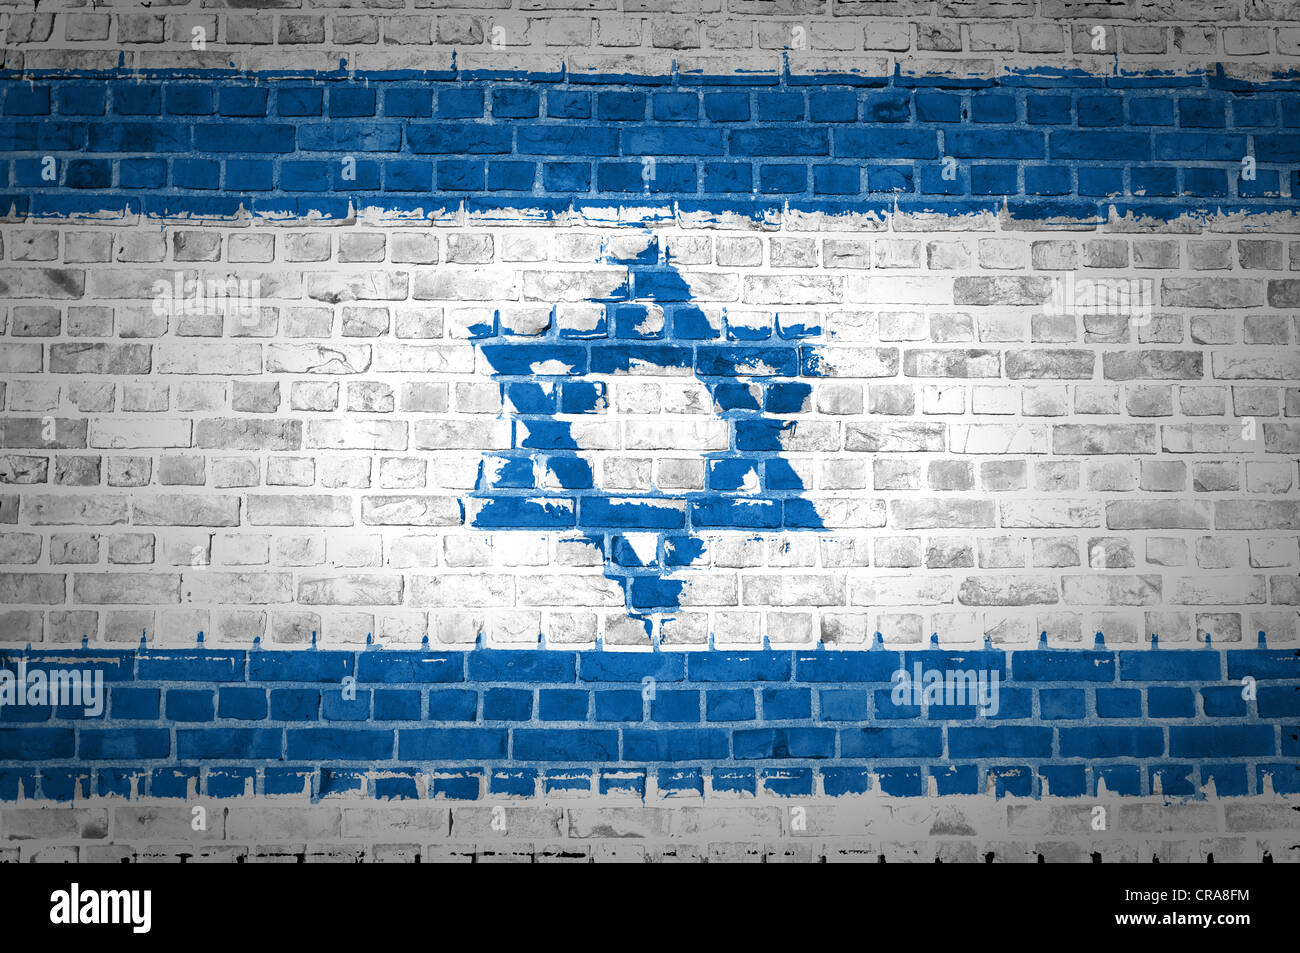 An image of the Israel flag painted on a brick wall in an urban location Stock Photo